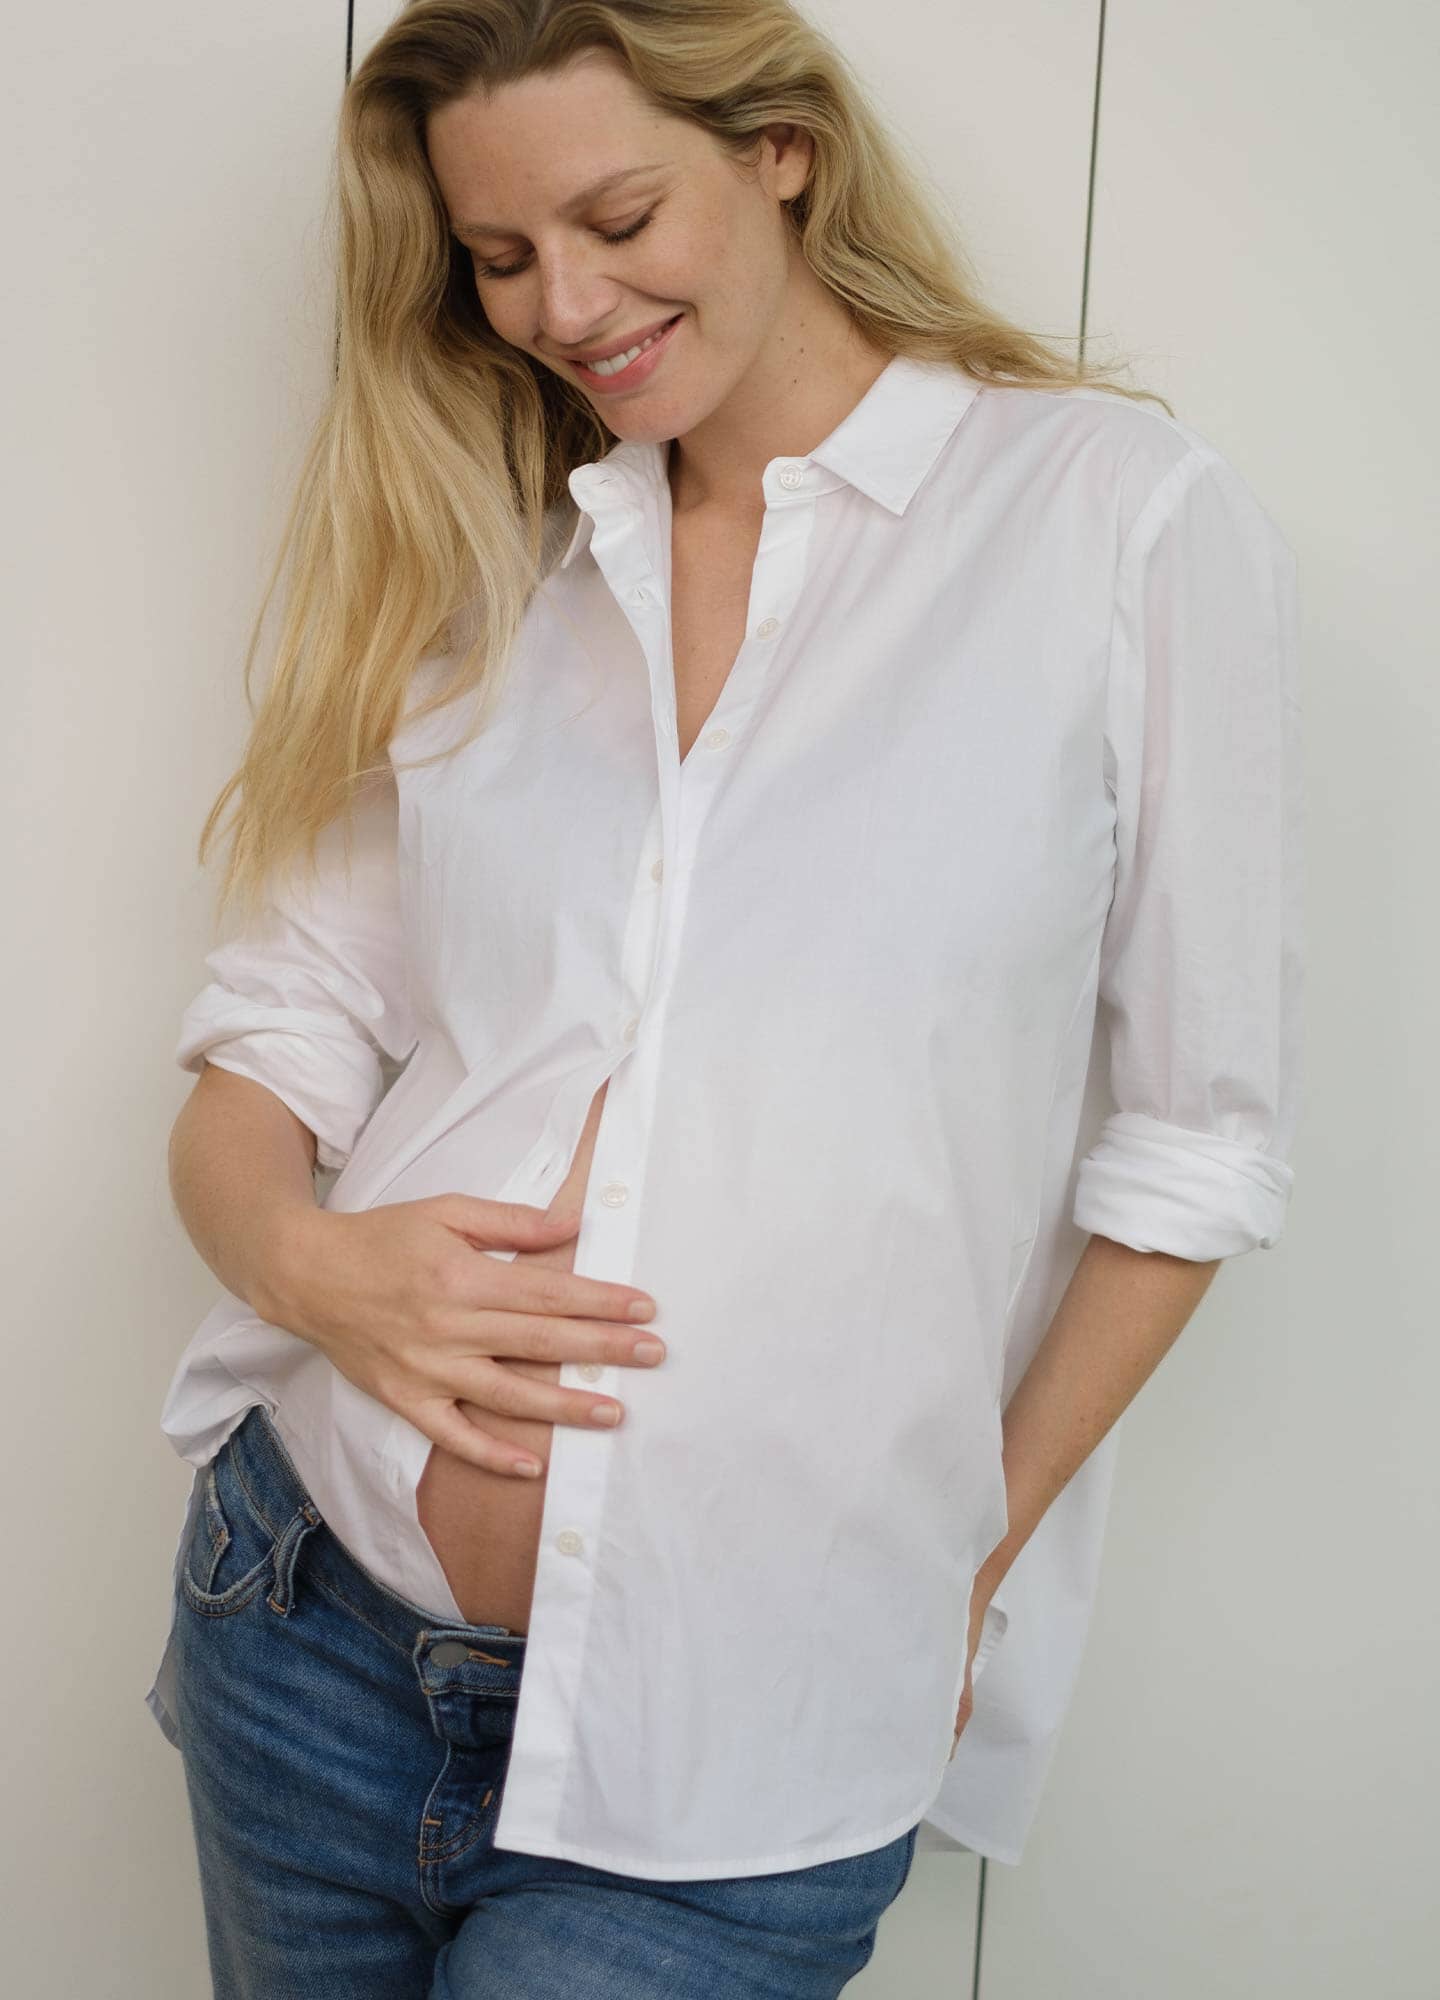 Classy Maternity Tops | Nursing Tops | HATCH Collection – HATCH Collection